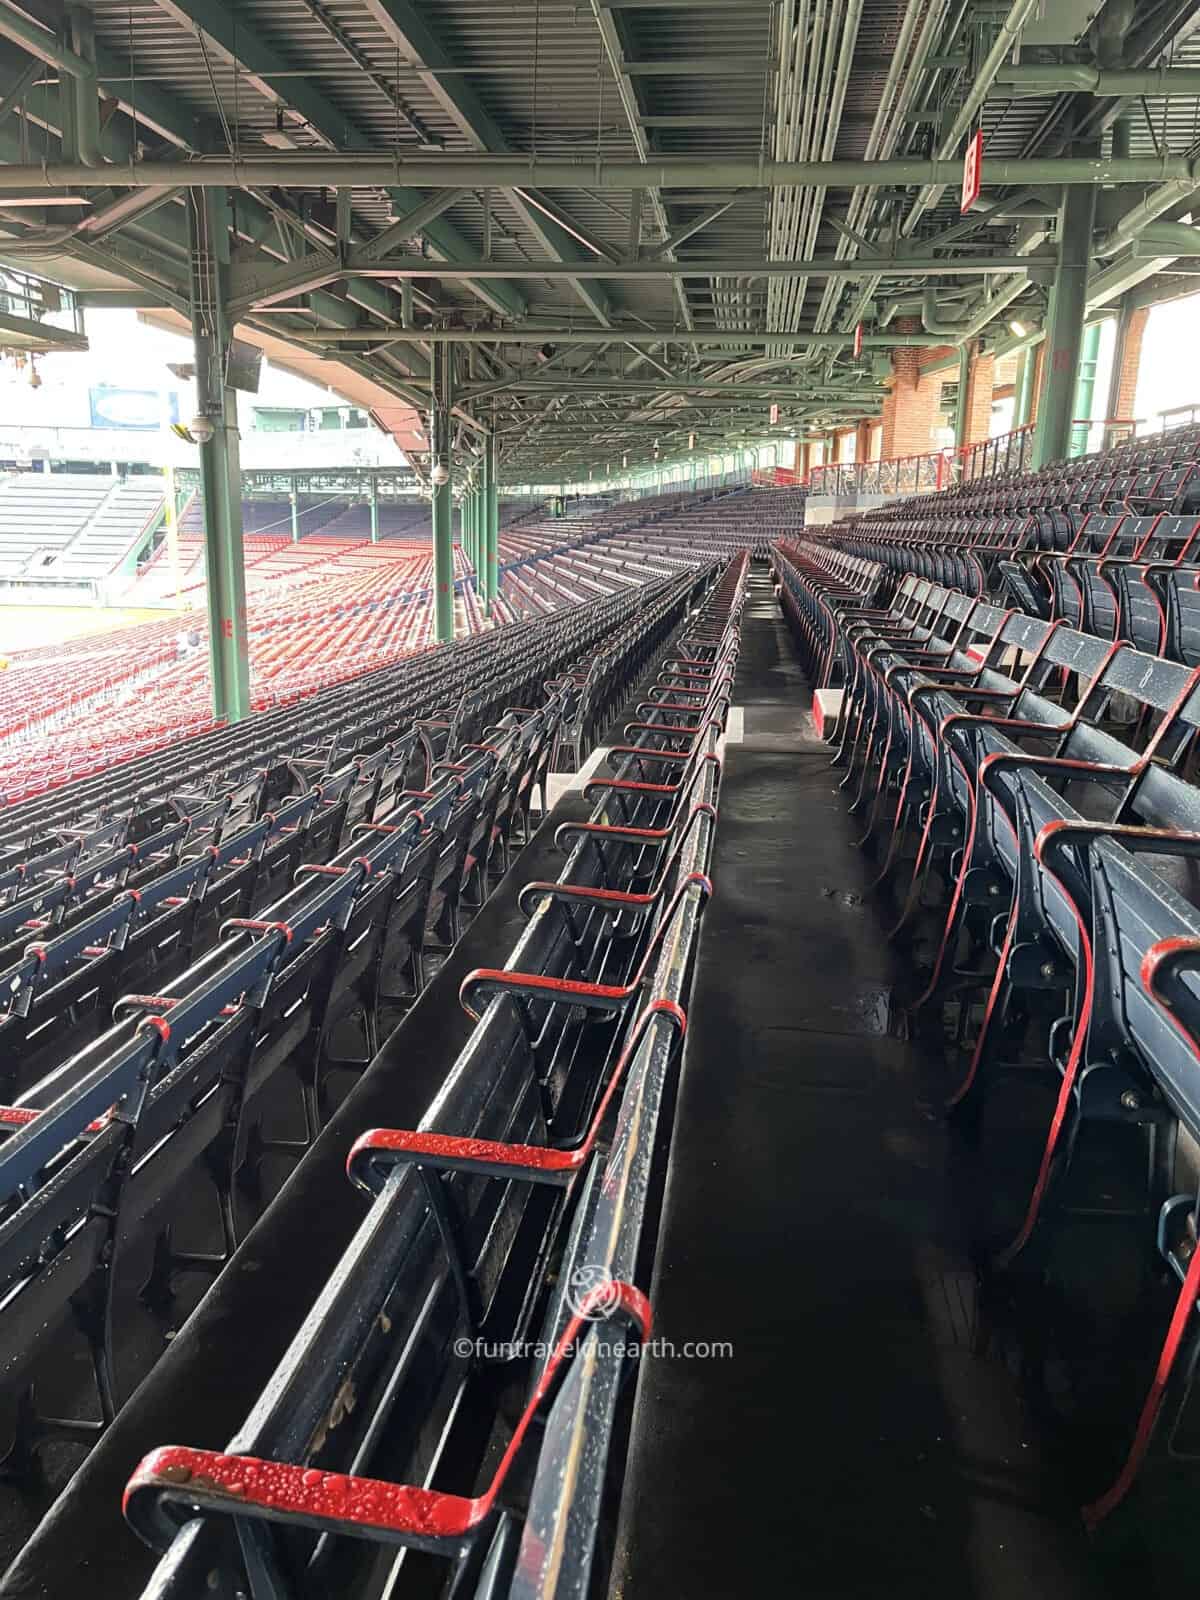 The old wooden seats,  FENWAY PARK, Boston